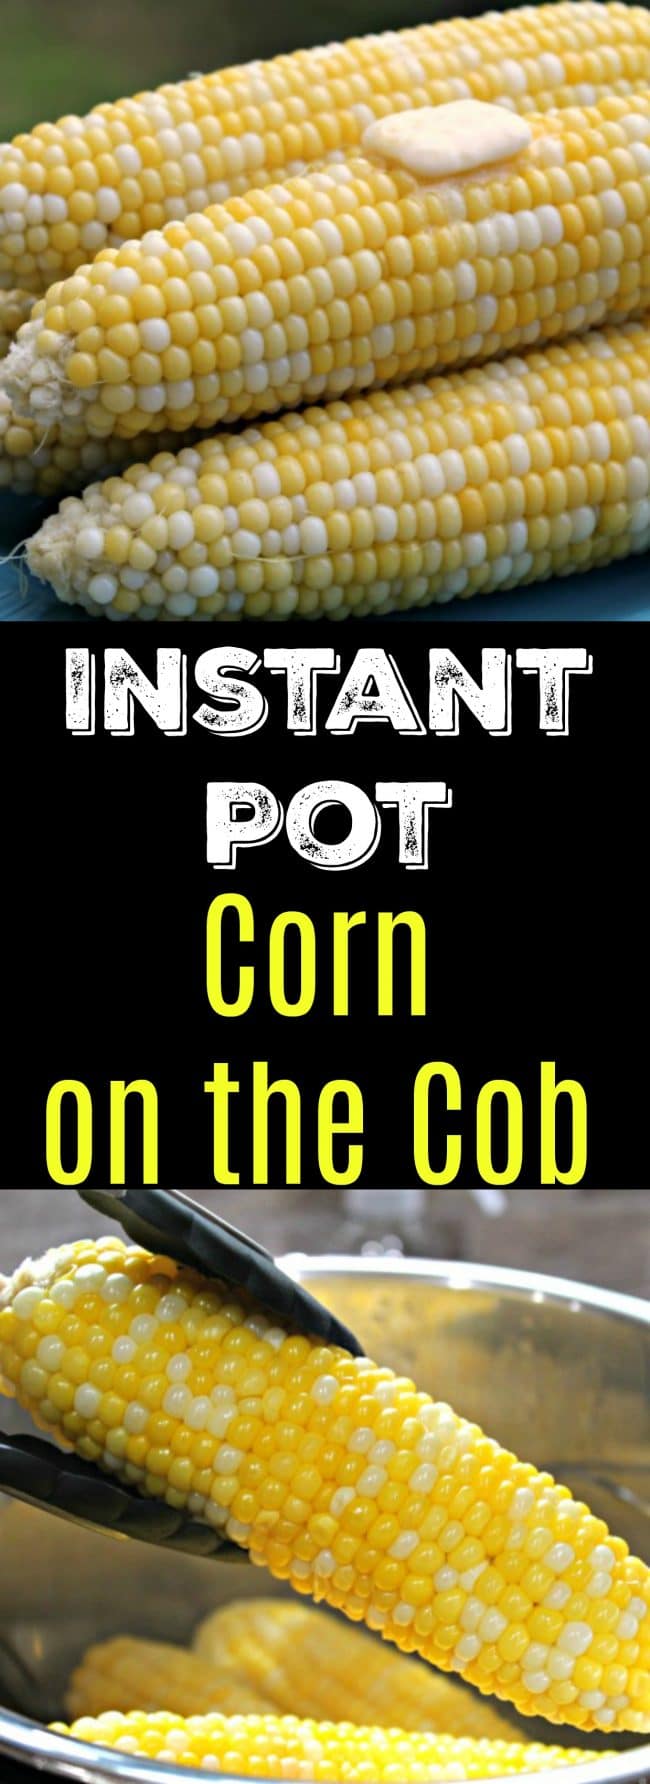 Instant Pot Corn on the Cob Cooks in 3 minutes